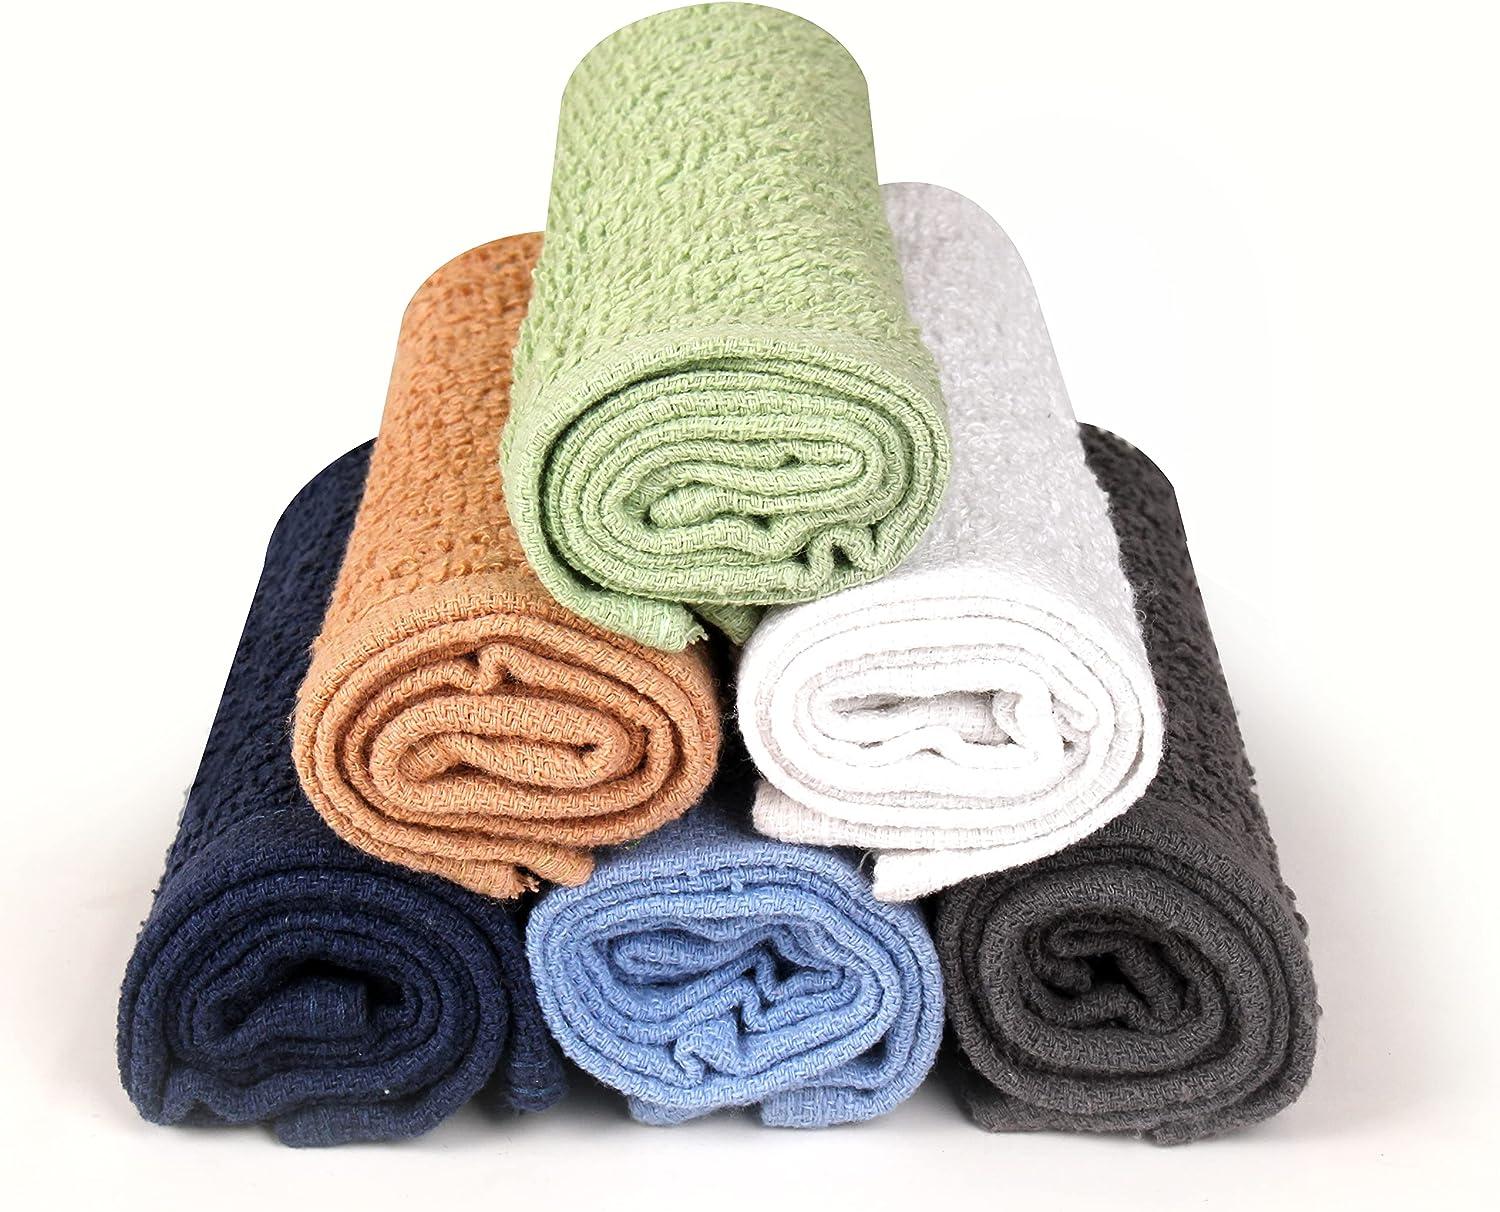 Pack of 8 Solid Multi-Colored Dish Towel & Wash Cloth Kitchen Accessory Set  - Terry Cloth